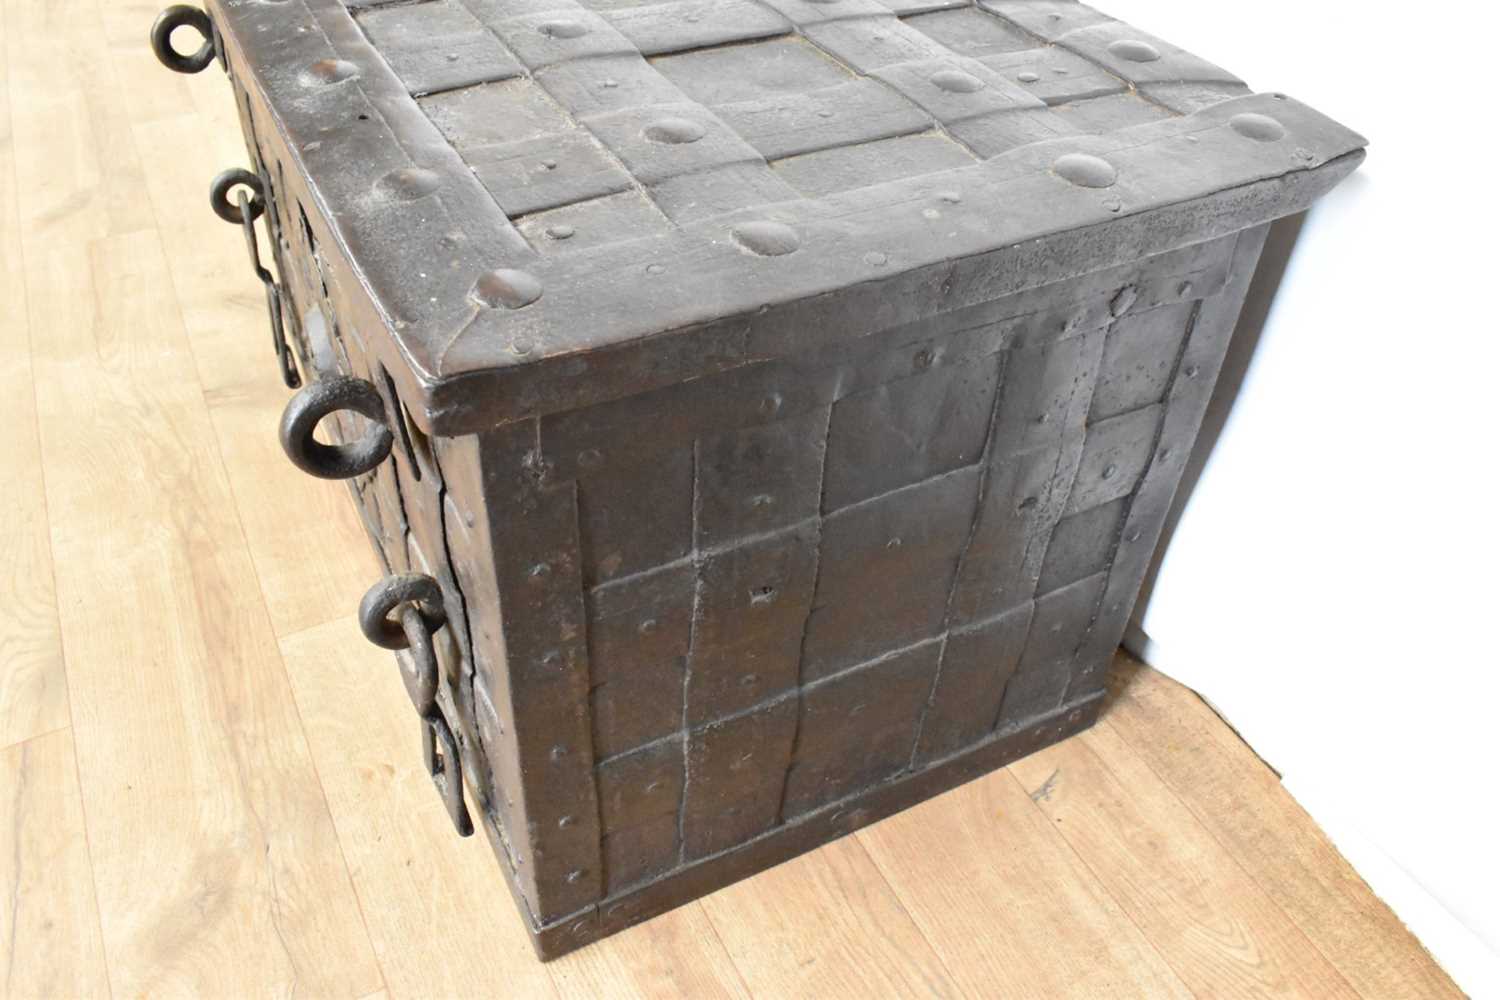 17th century German iron Armada chest with intricate locking system, key marked S. Morden - Image 8 of 23